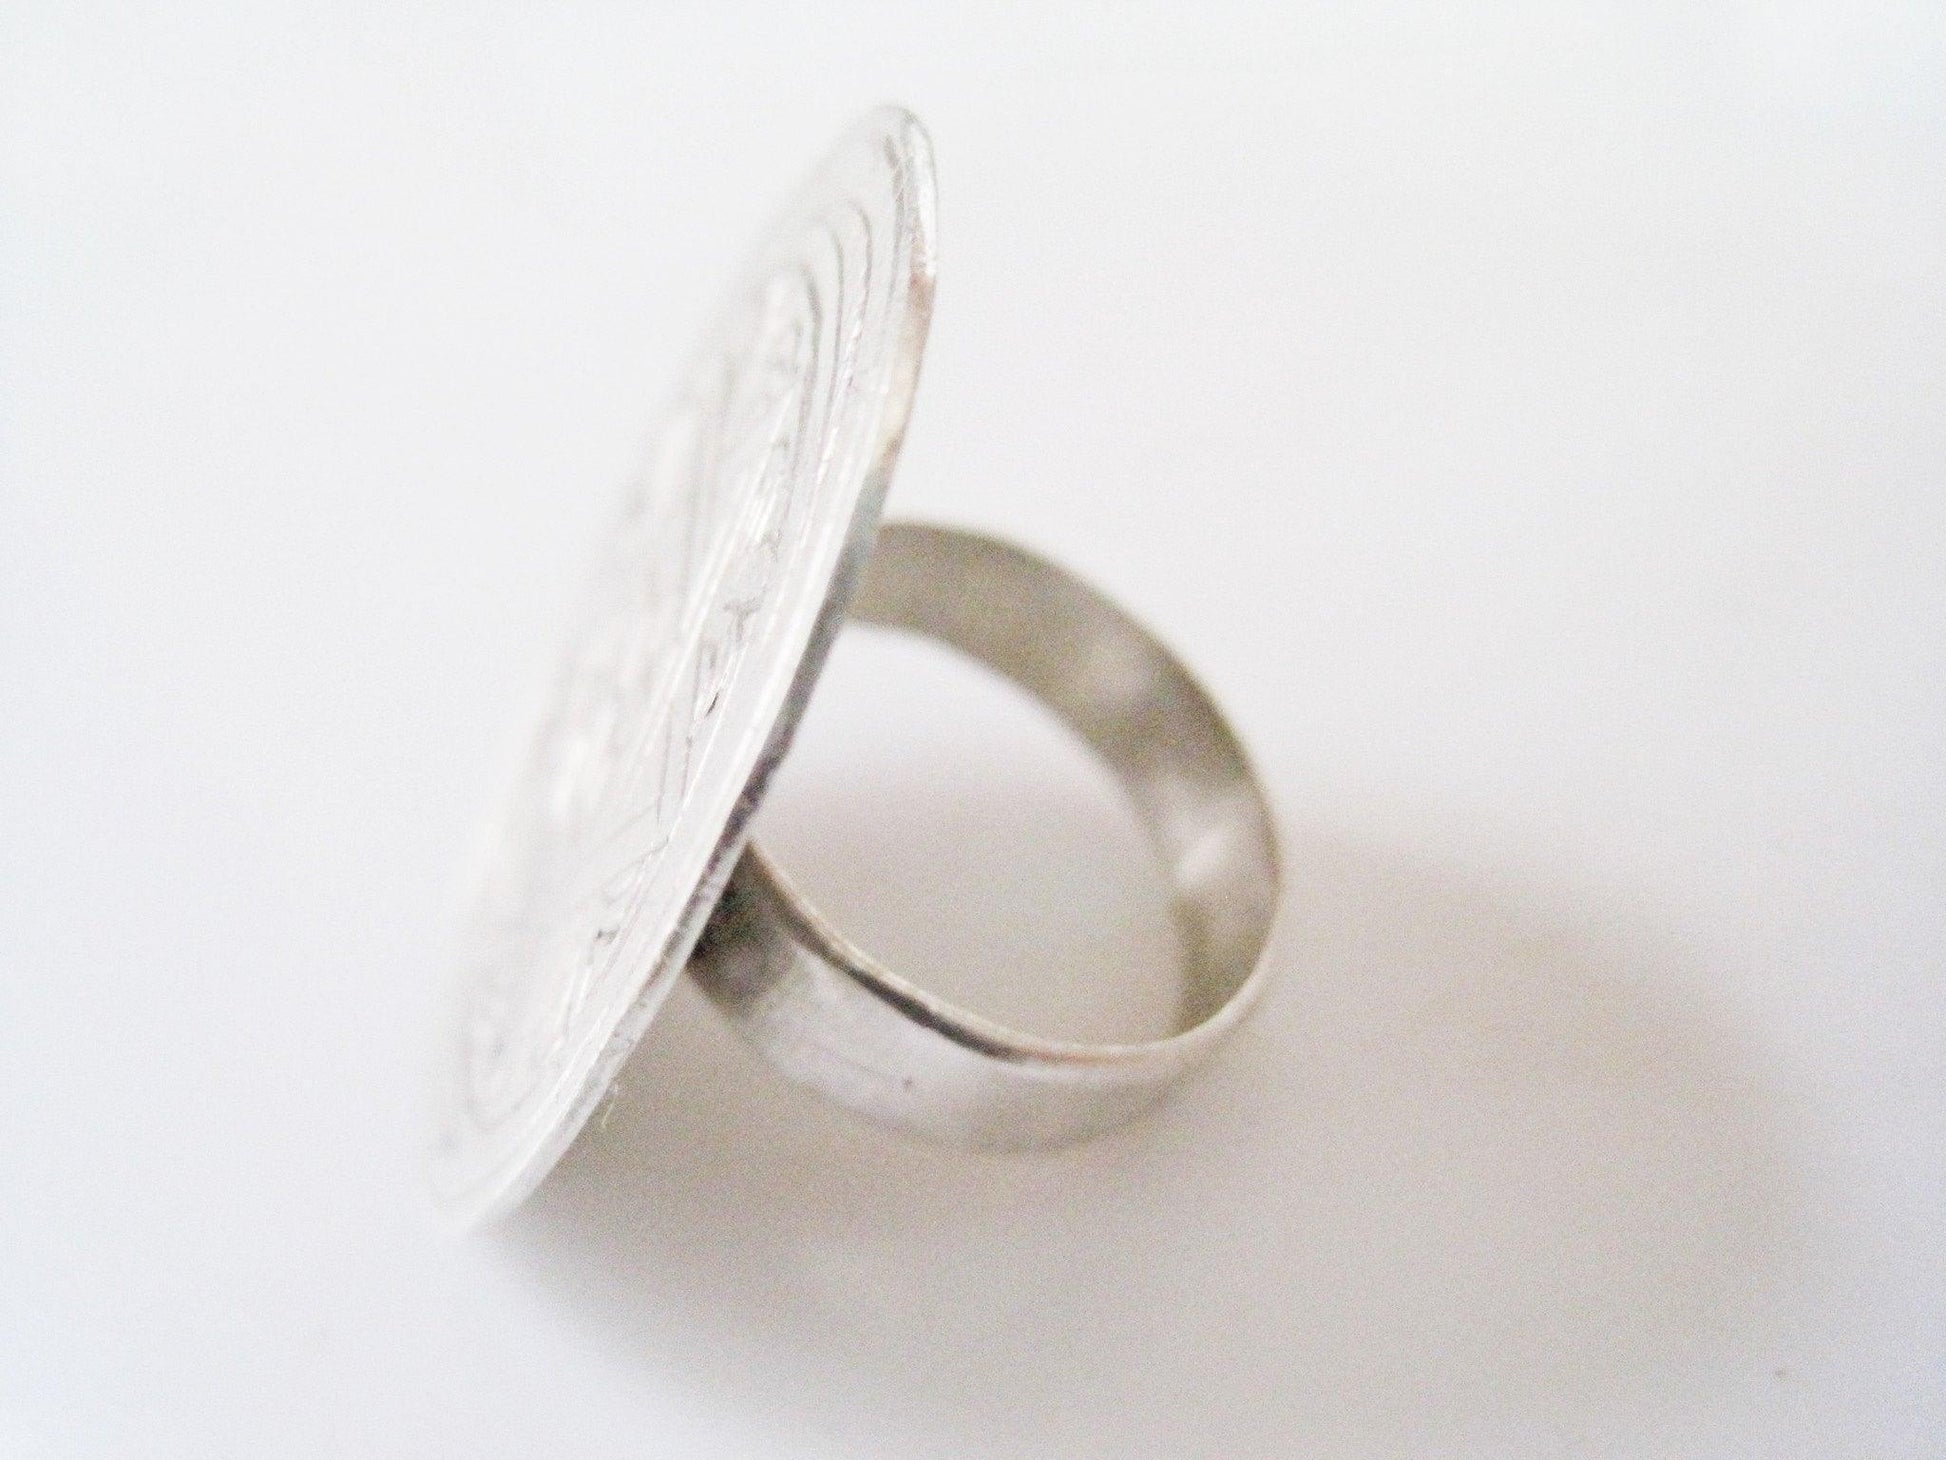 Vintage Large Oval Silver Siwa Berber Ring with Hand Incised Patterns - Anteeka